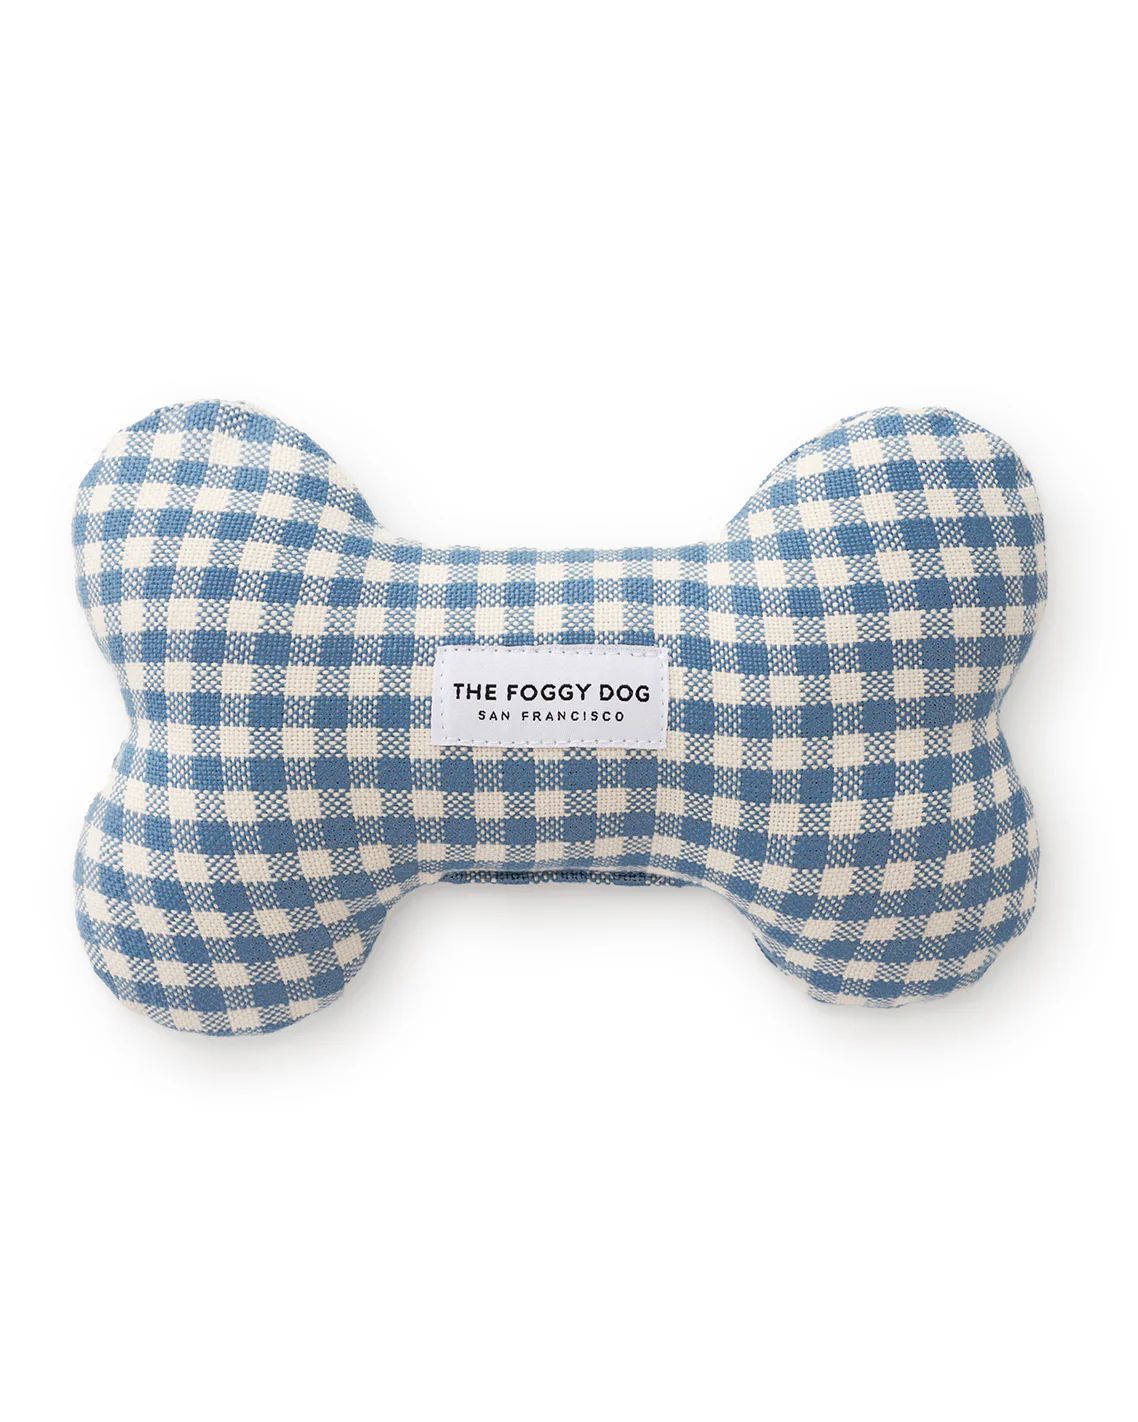 DJ X TFD Squeaky Toy in Blue Gingham | Draper James (US)